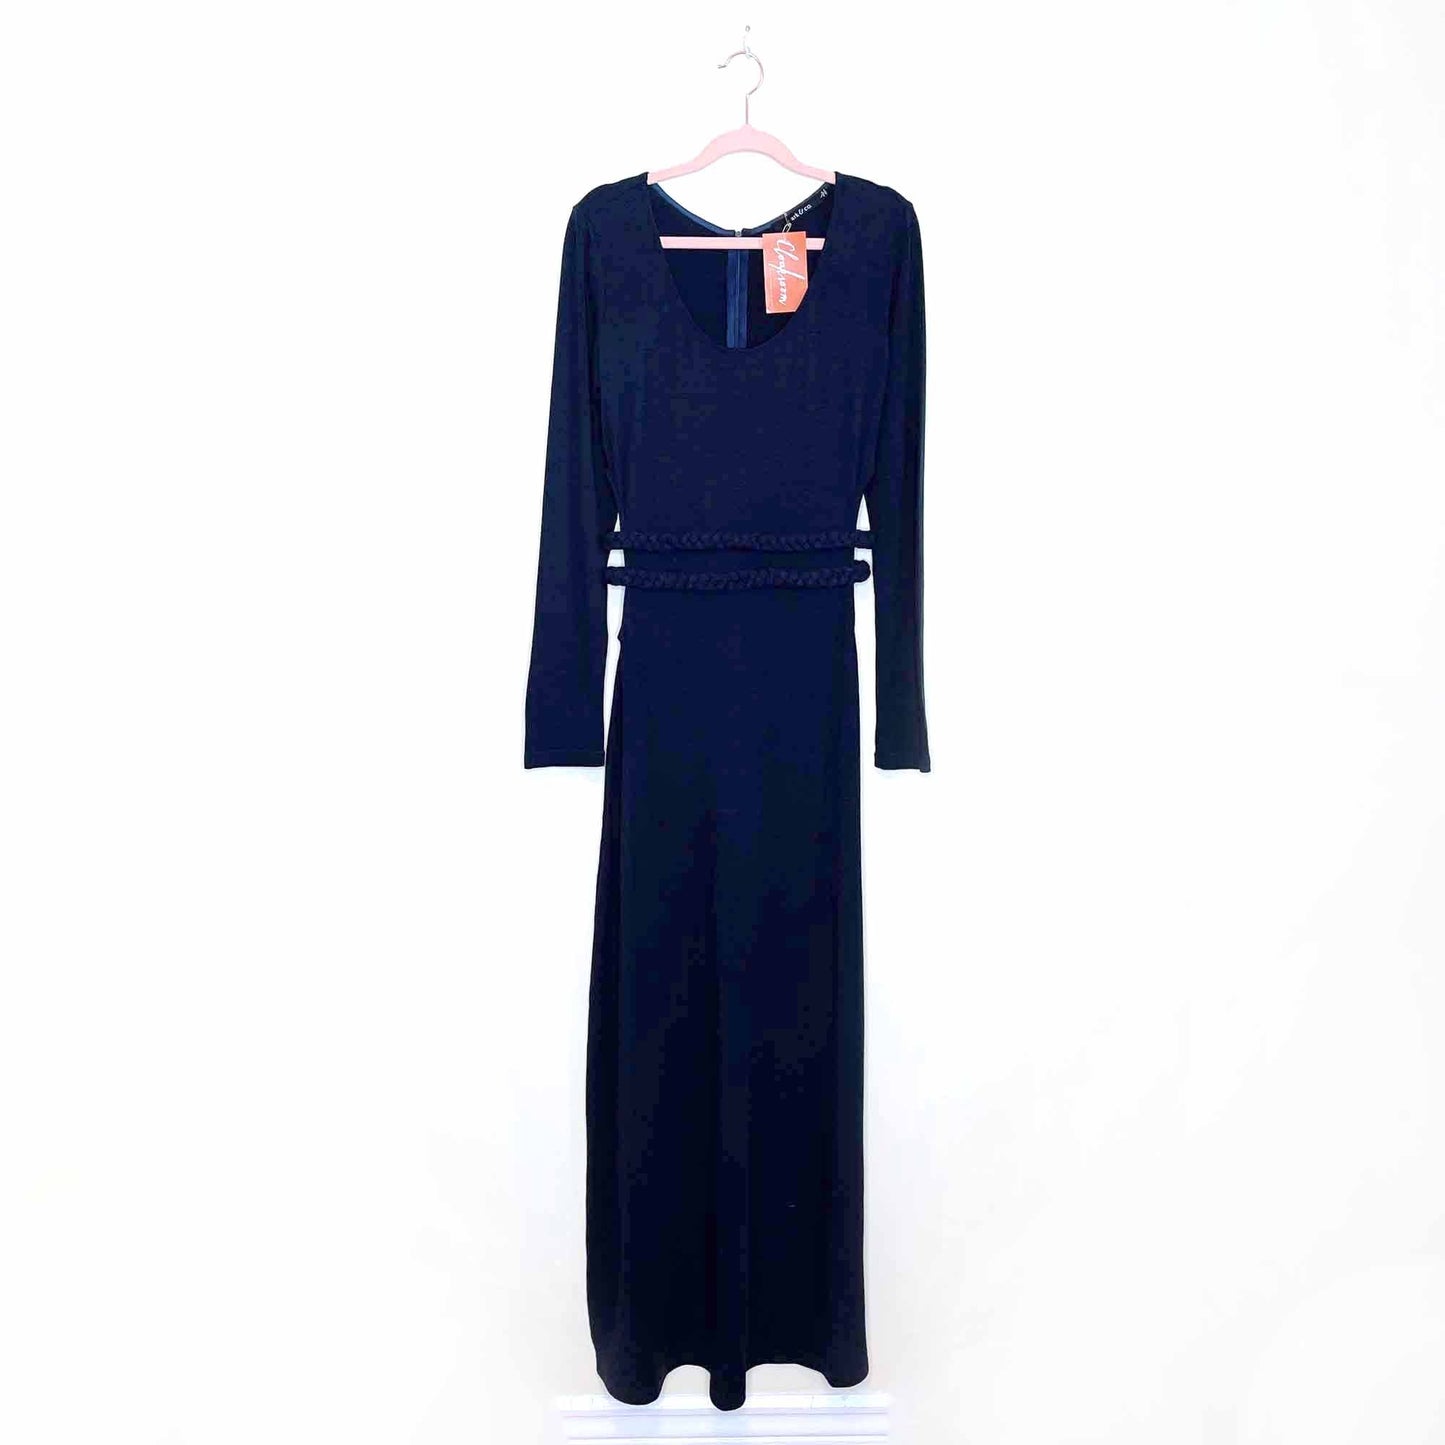 nwt ark & co long sleeve knit maxi dress with cutout sides - size large